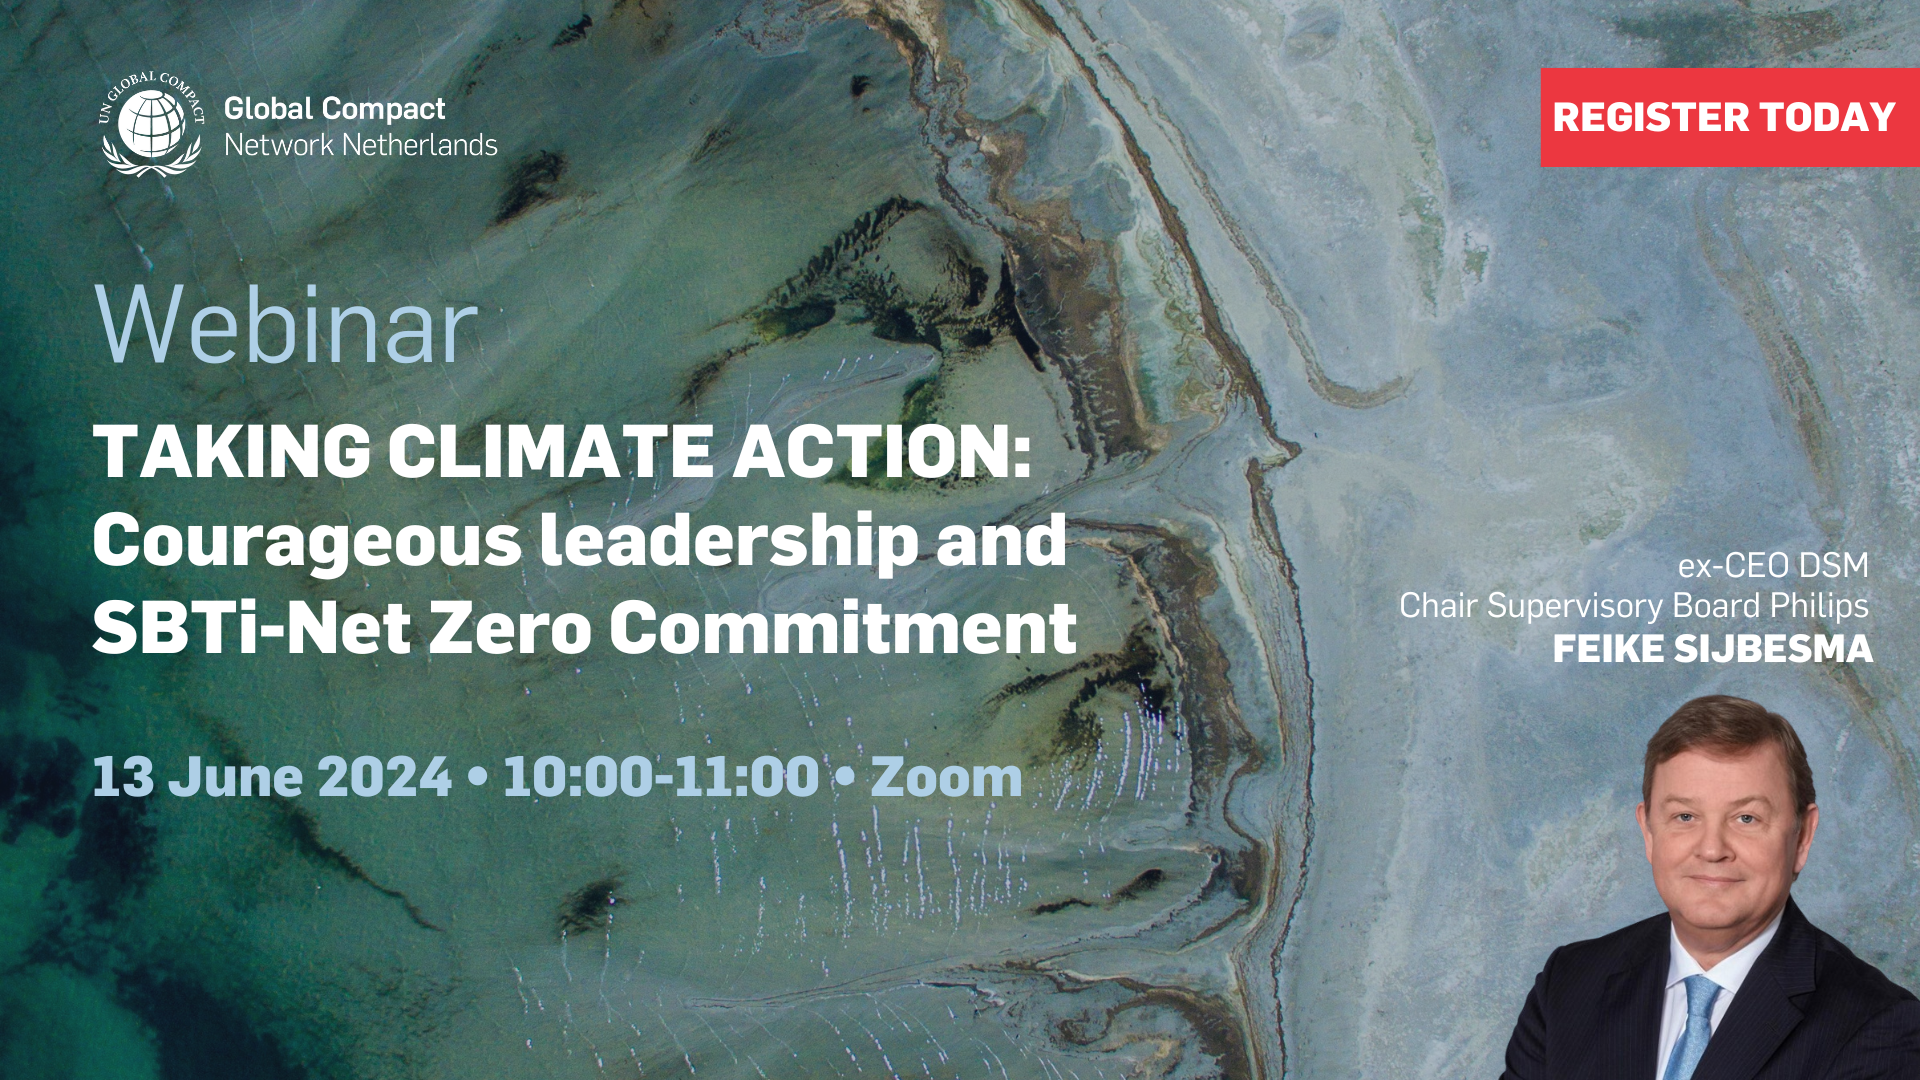 Webinar 'Taking Climate Action: Courageous leadership and SBTi -Net Zero Commitment'